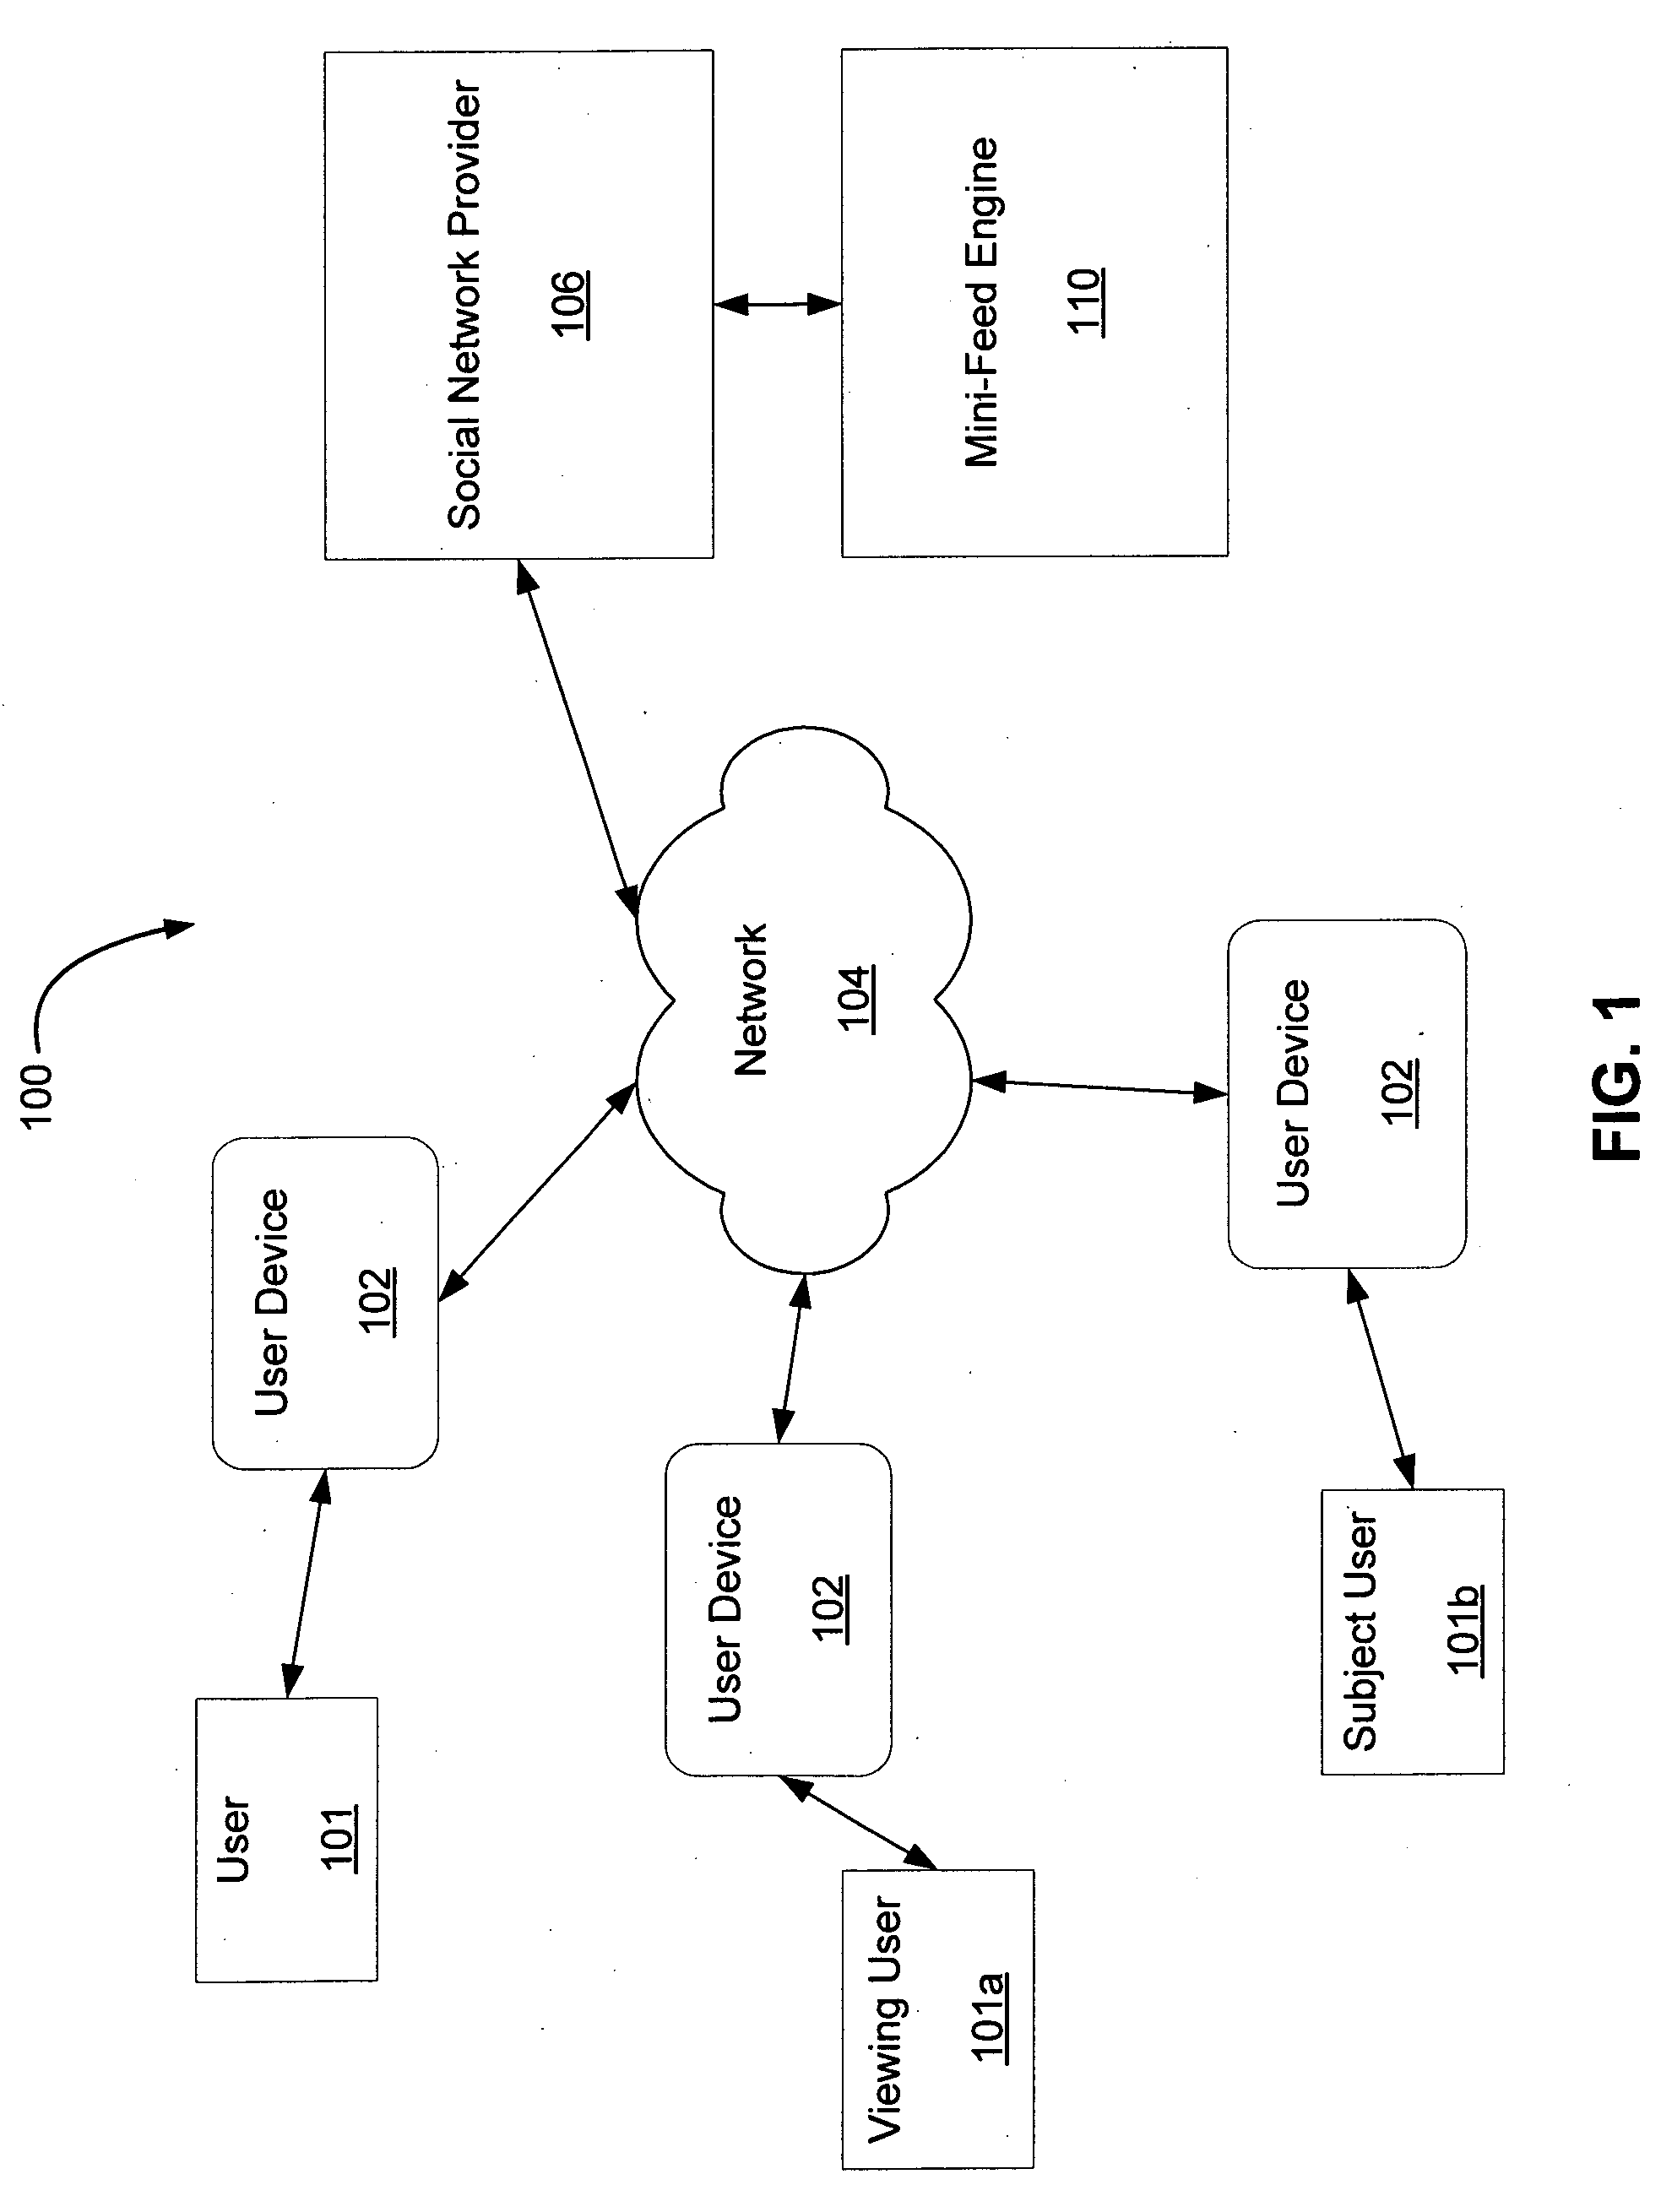 System and method for dynamically providing a news feed about a user of a social network